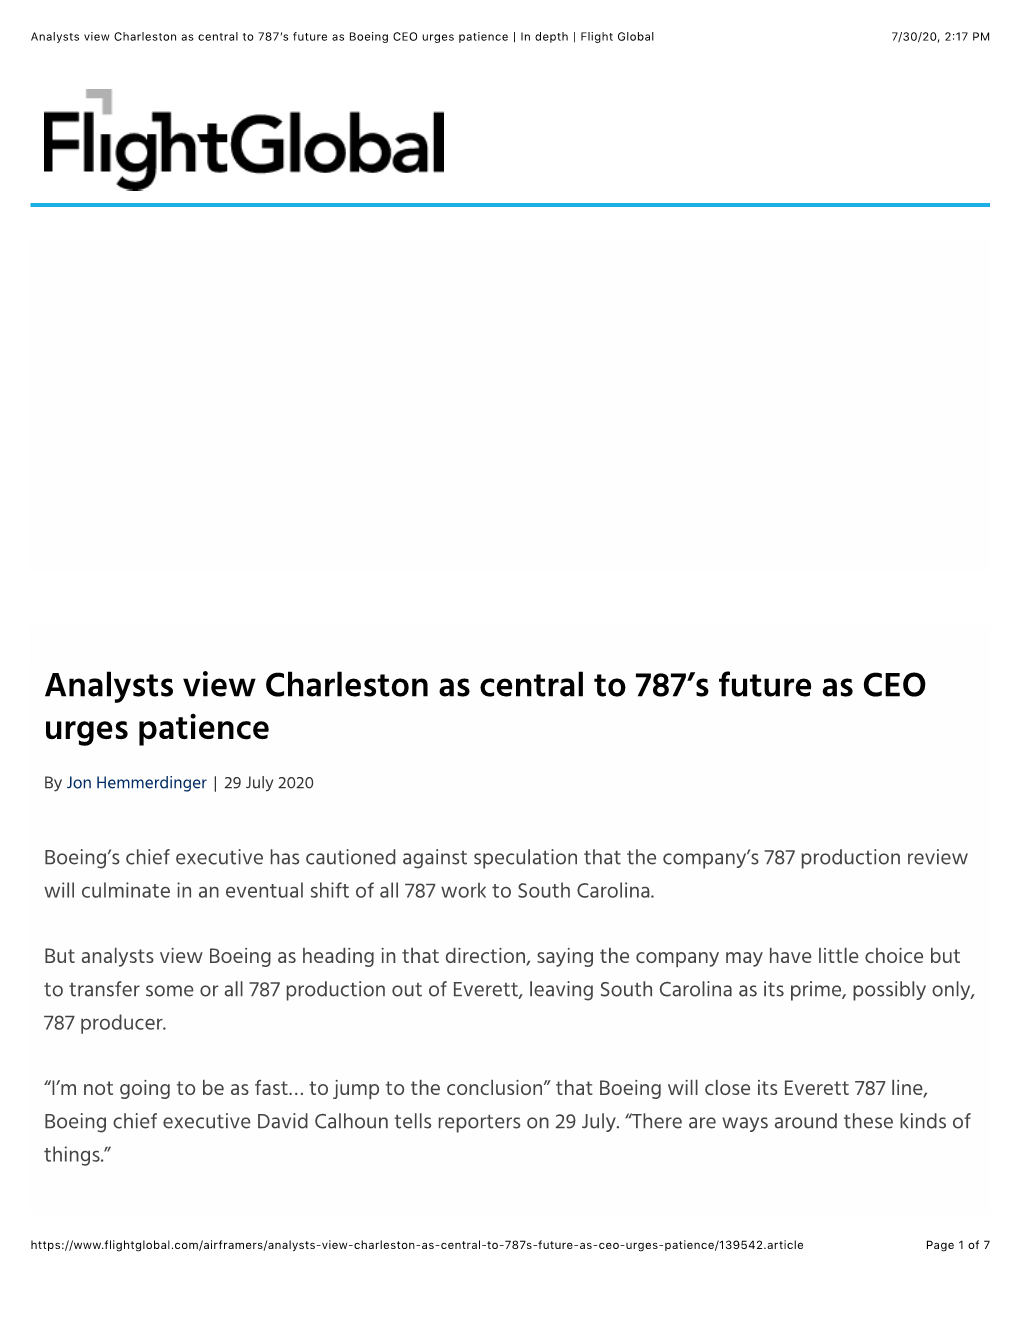 Analysts View Charleston As Central to 787'S Future As Boeing CEO Urges